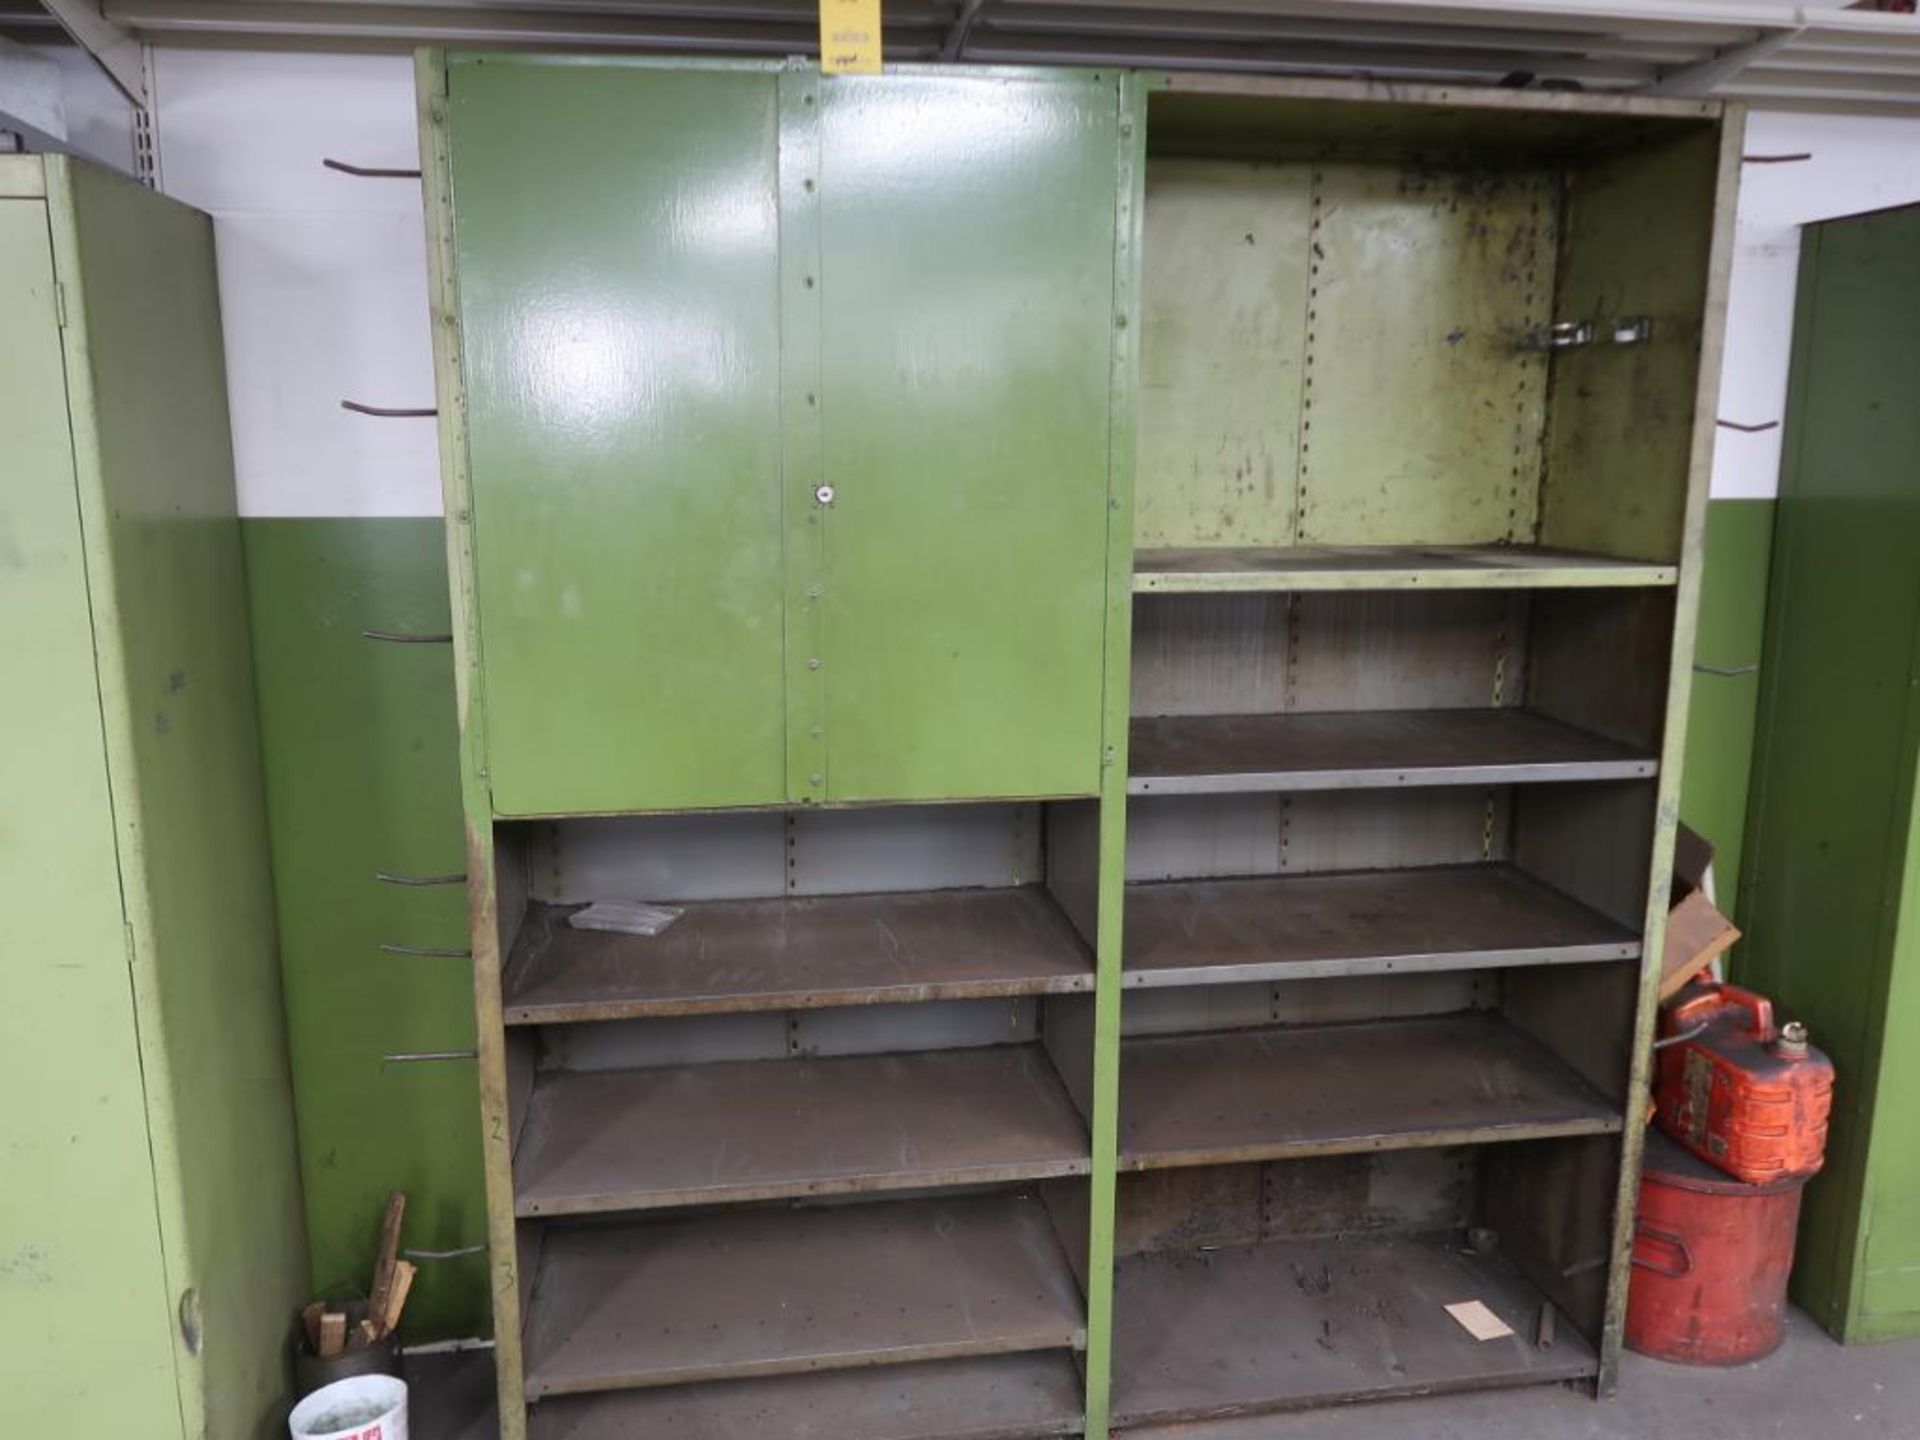 LOT: Shelving & Cabinet, Assorted Large Drill Bits, LOCATION: TOOL ROOM